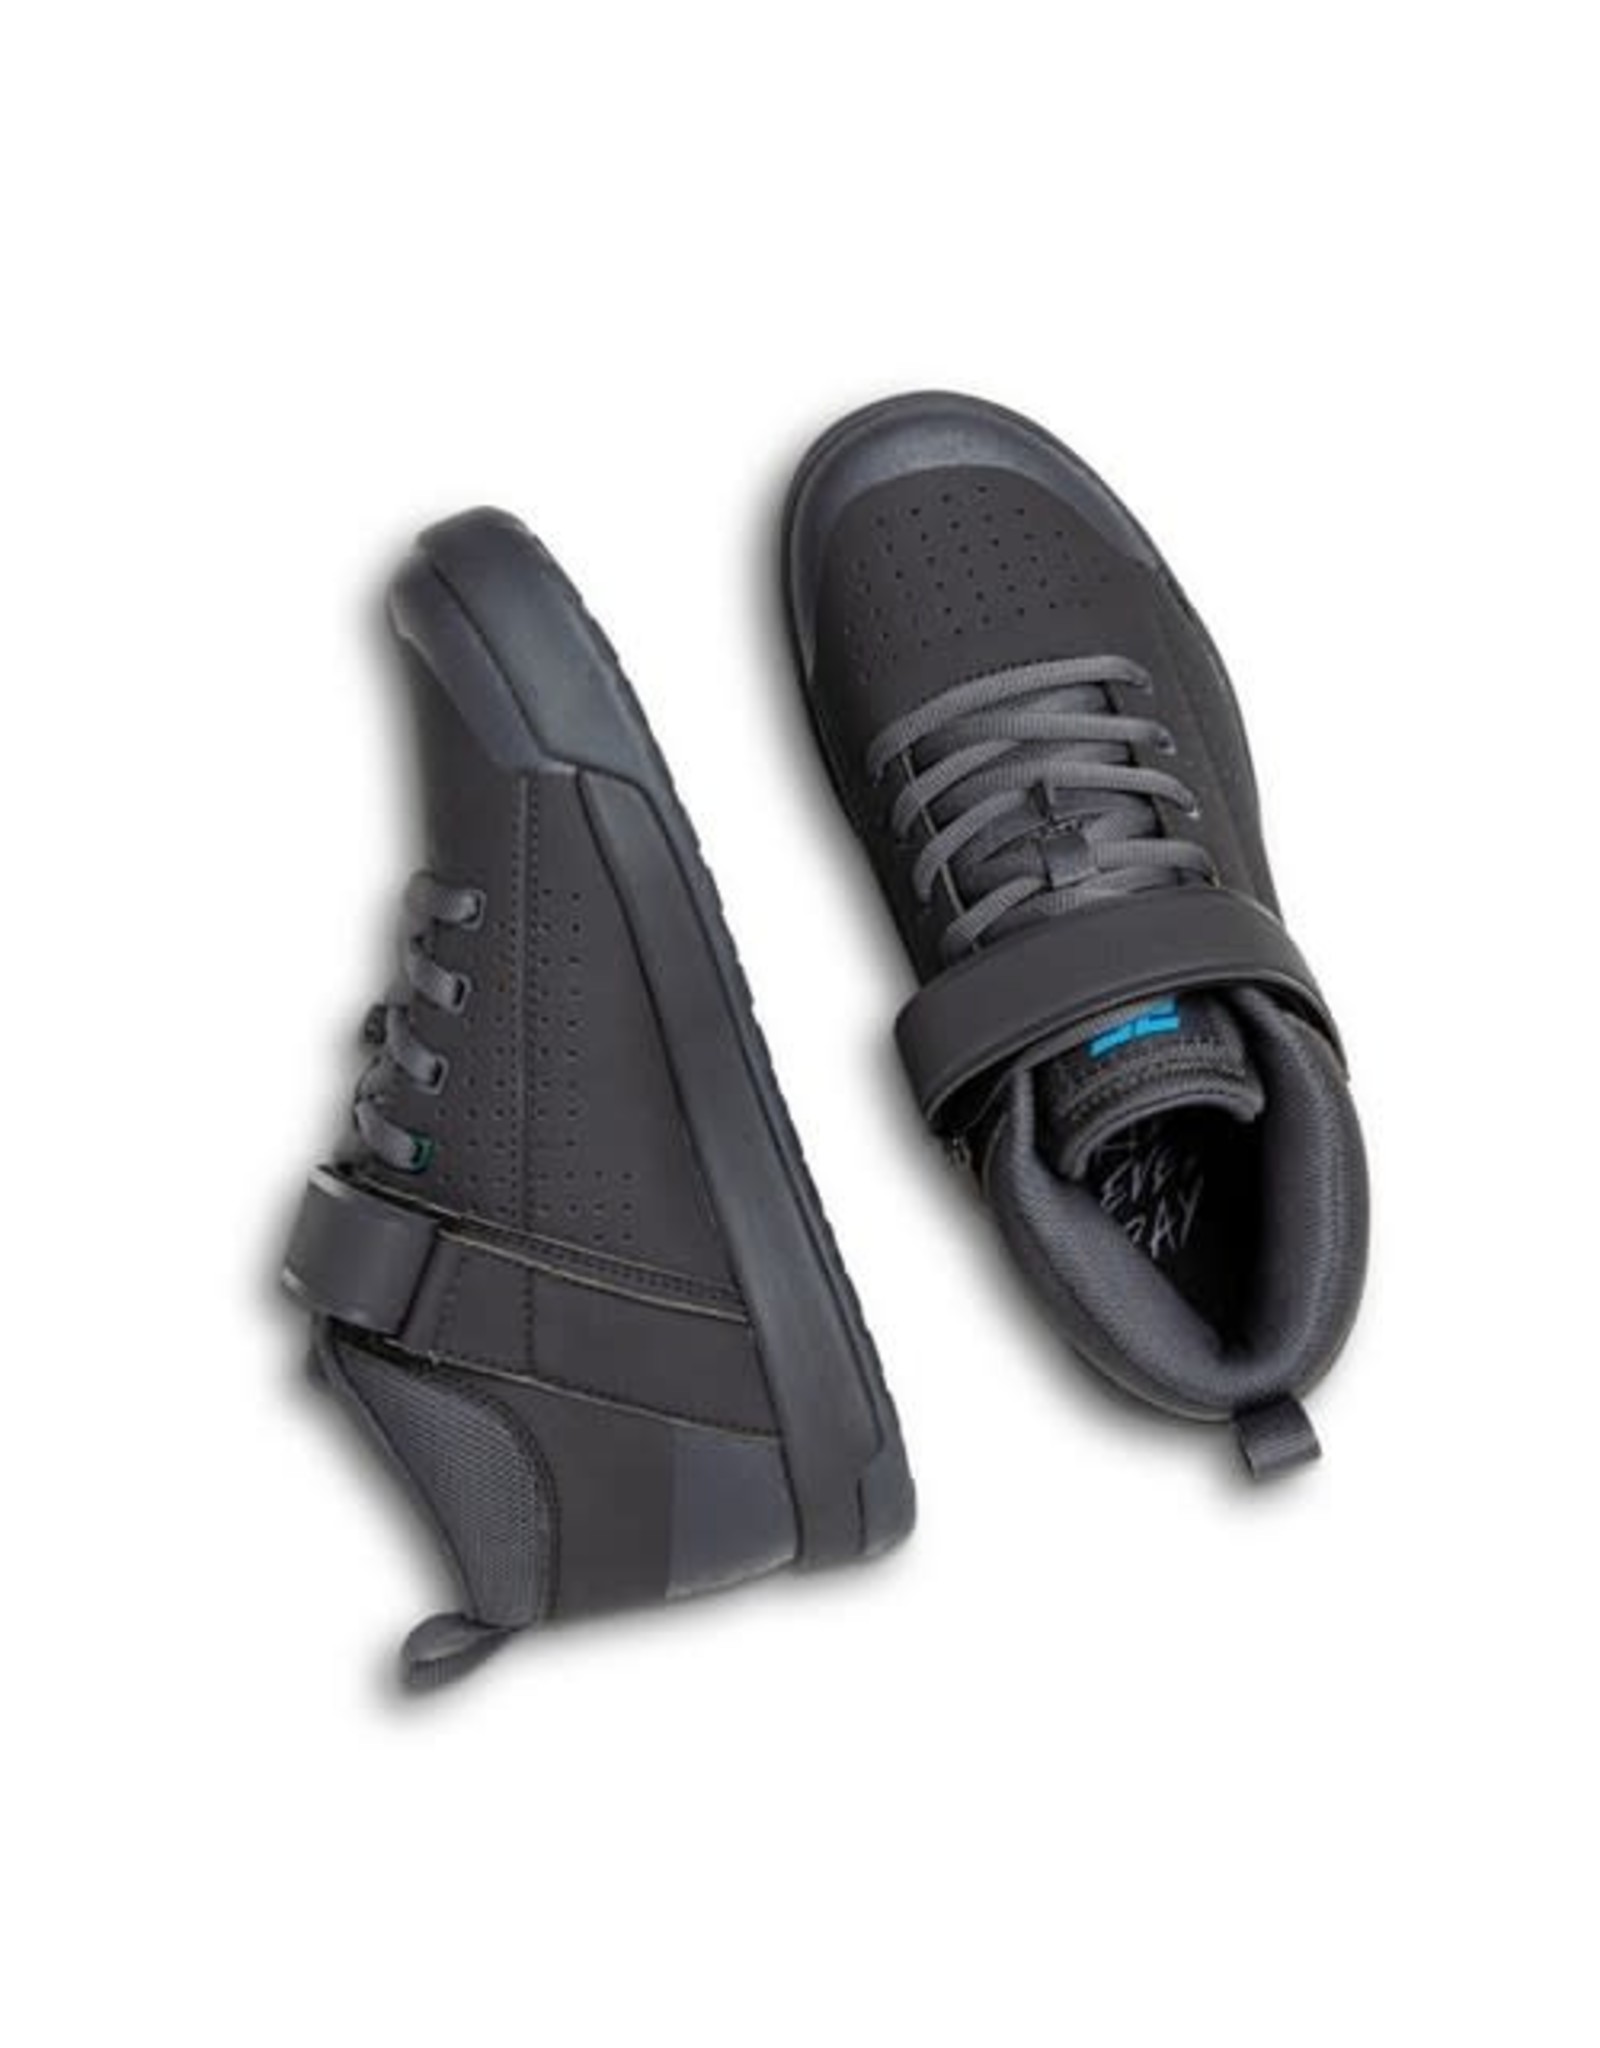 RIDE CONCEPTS RIDE CONCEPTS '22 WOMENS WILDCAT SHOES